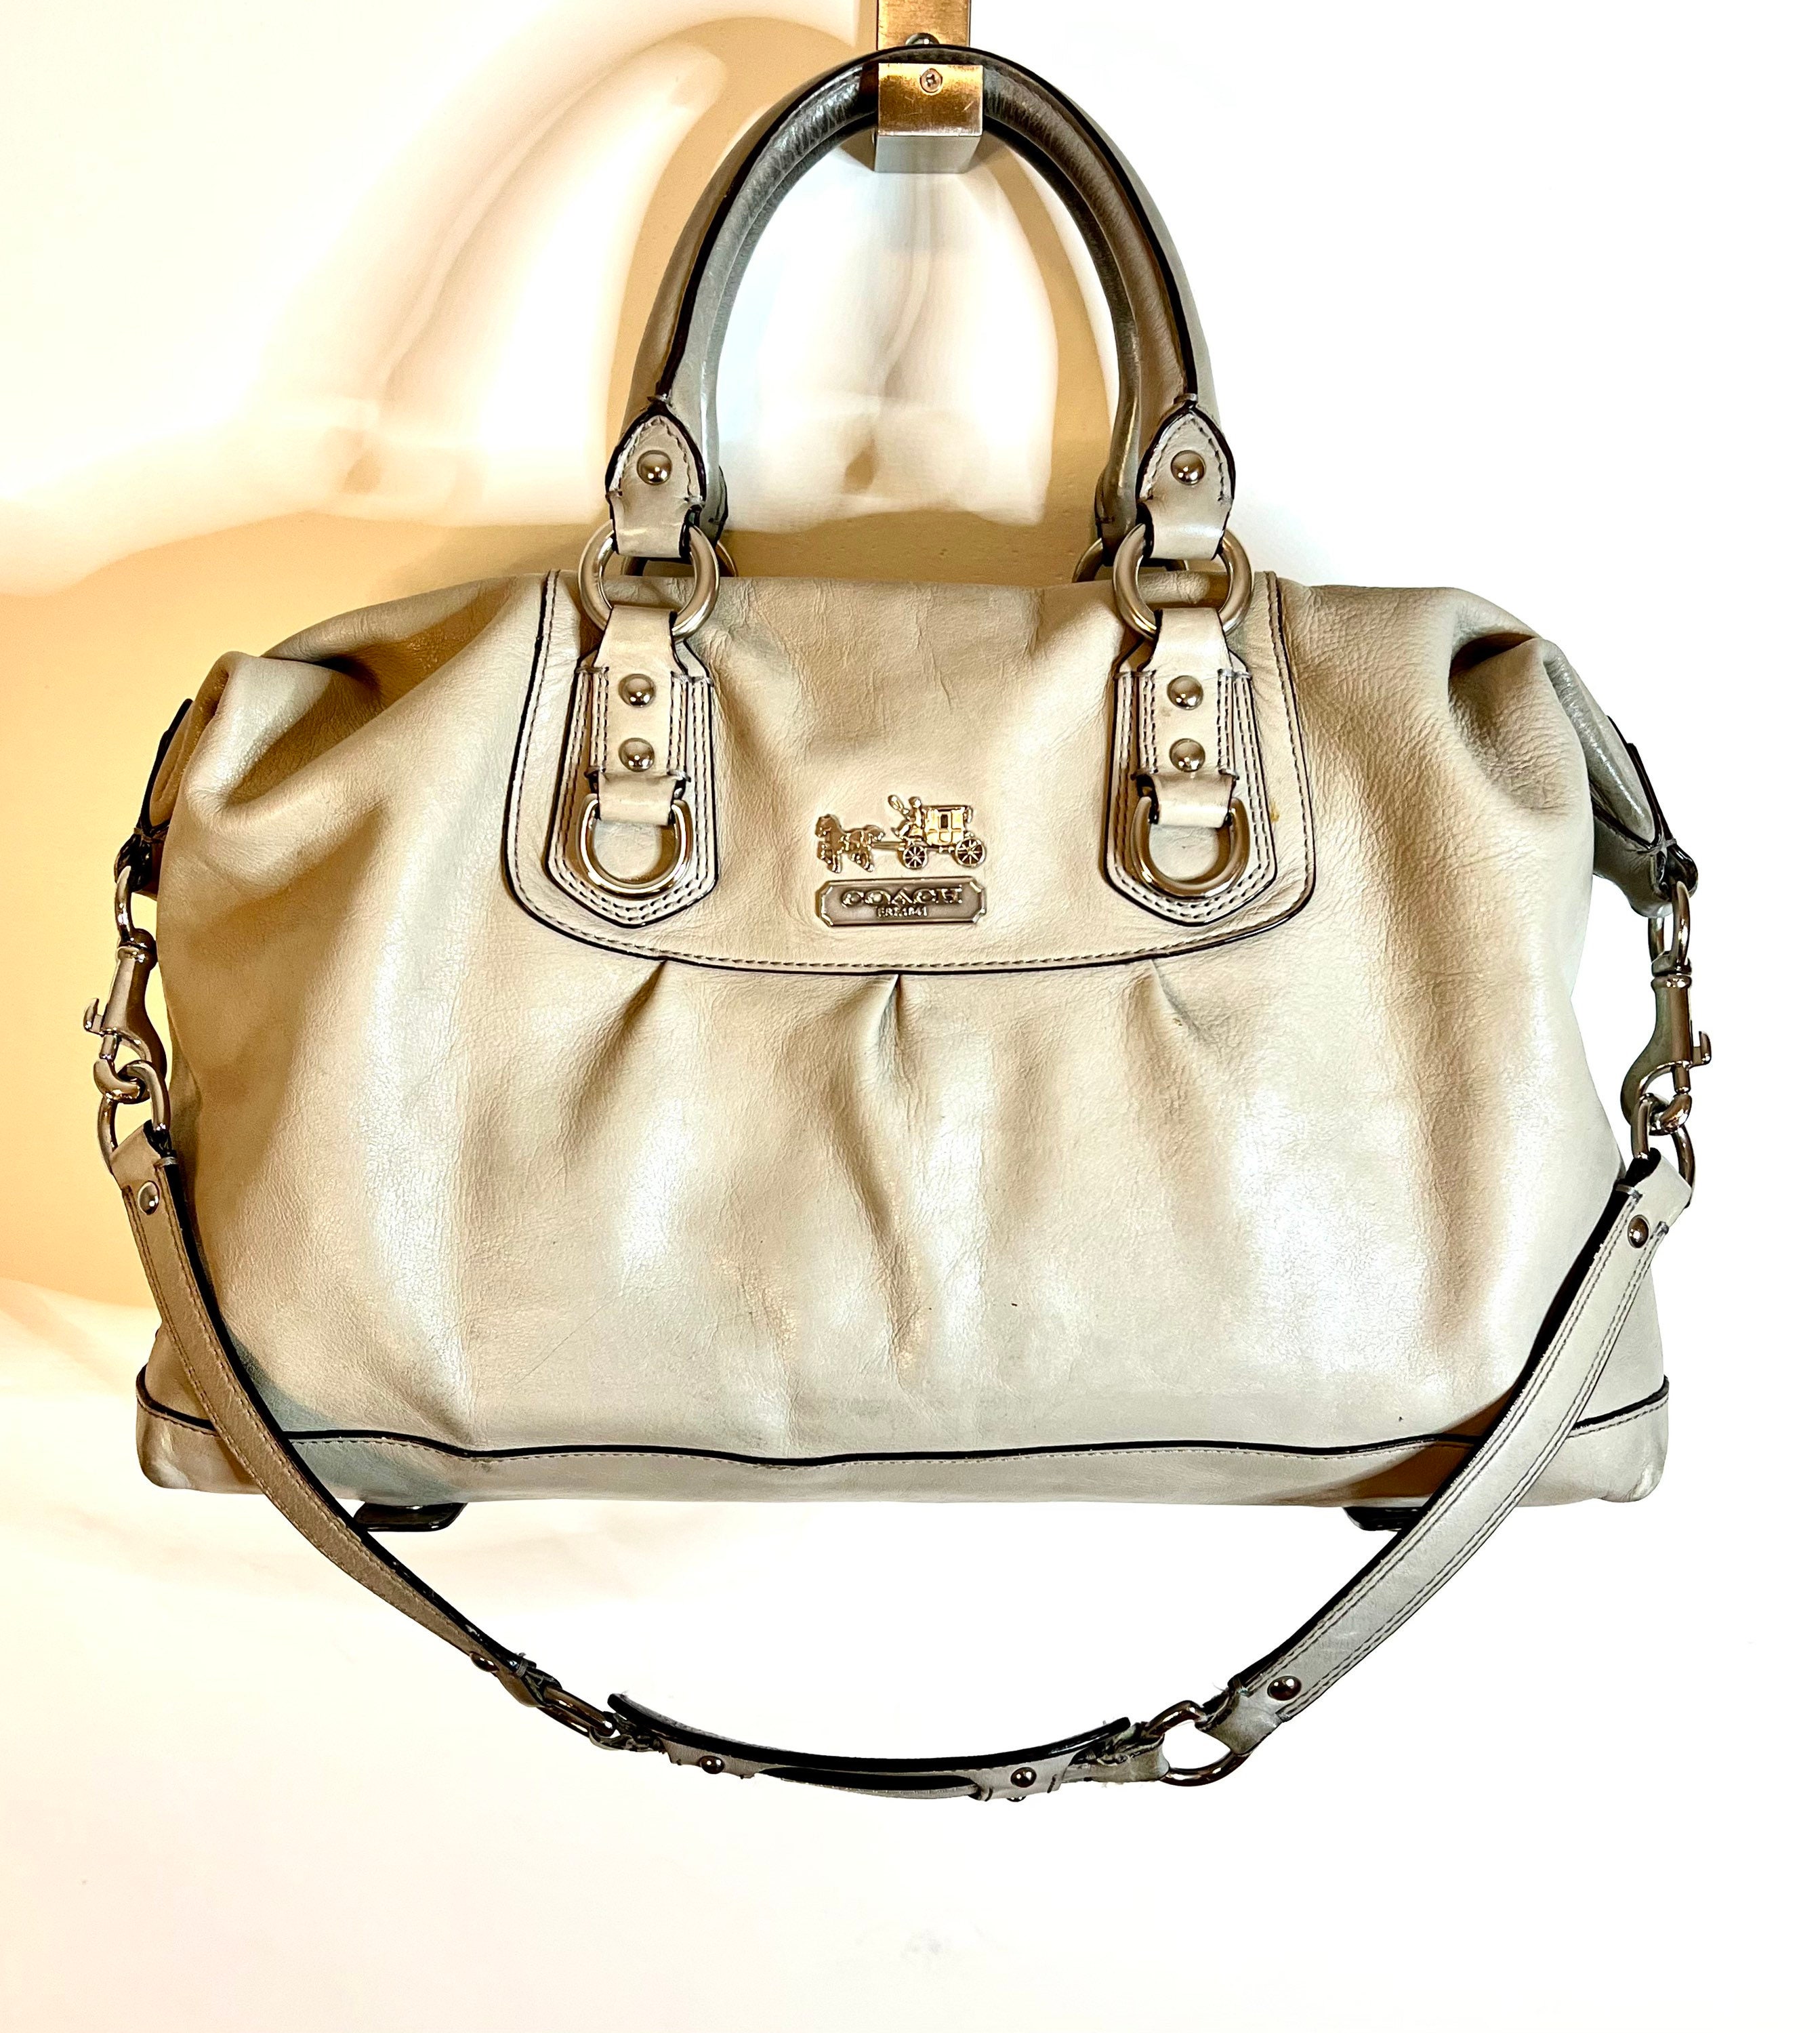 Mid-2000s Coach Shoulder Bag in Gold and Beige